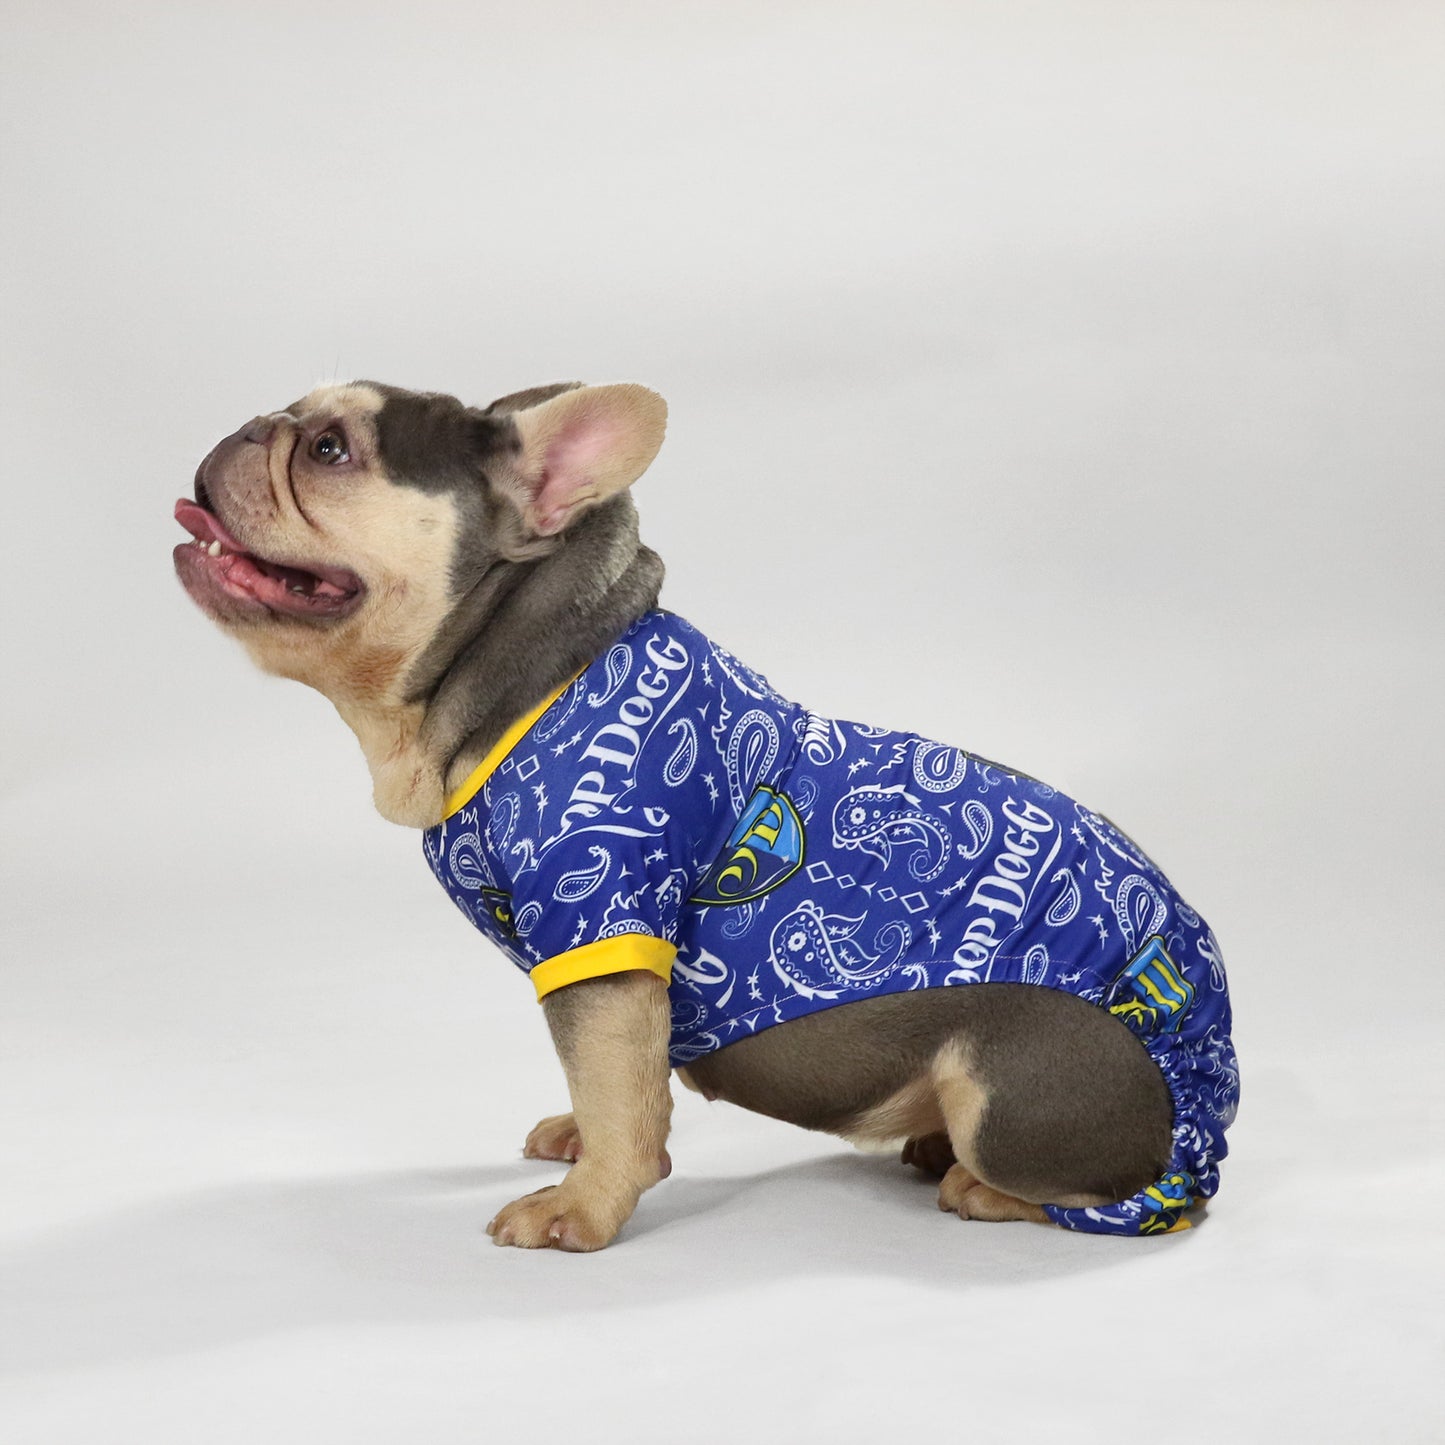 Chunky Monkey the French Bulldog wearing the Halftime Deluxe Pet PJs in size Medium.